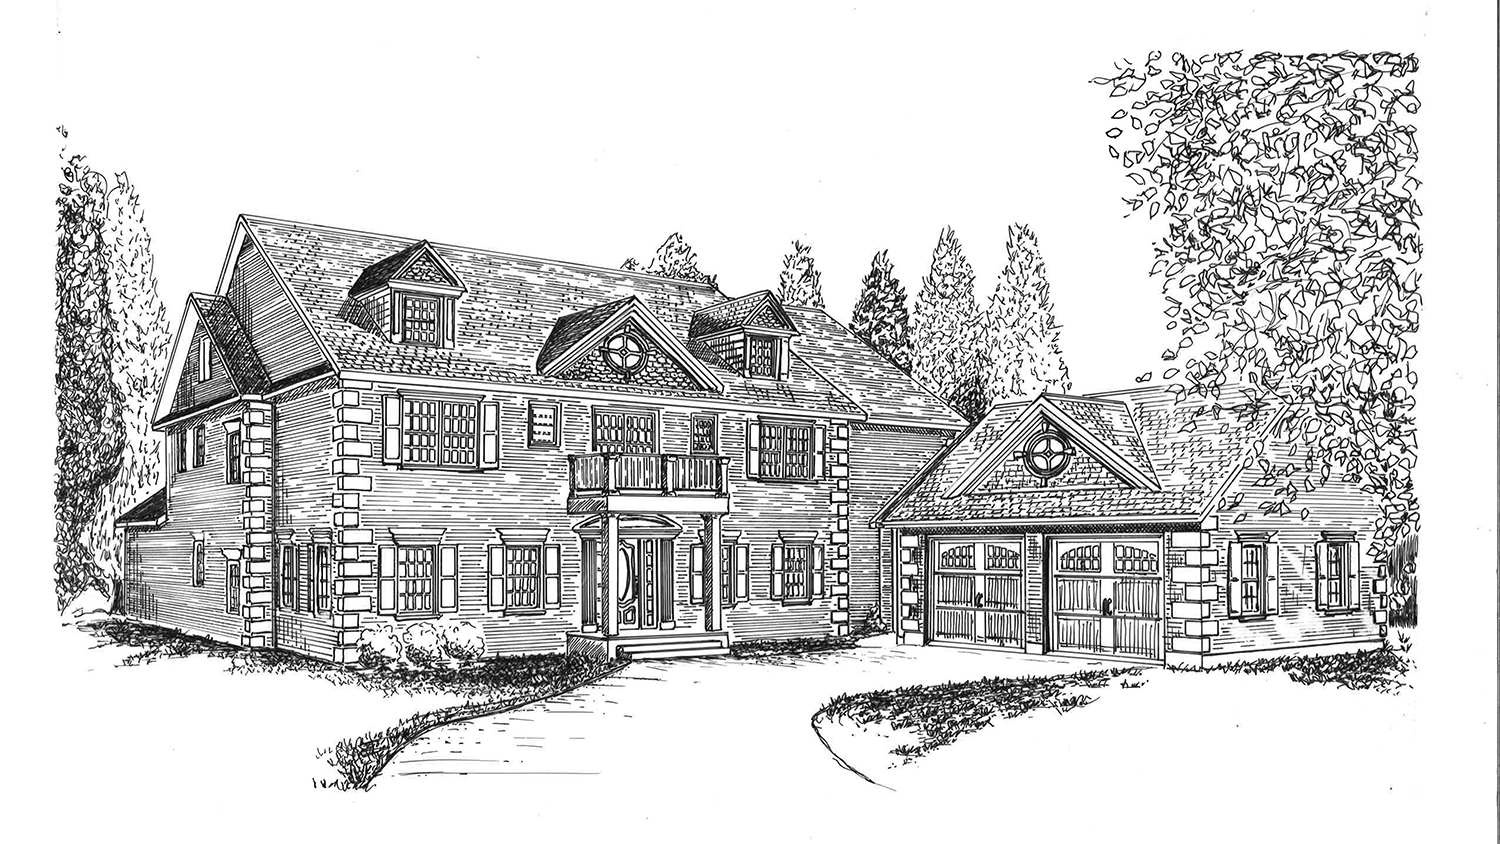 2S303 - Gilford House_Page_8